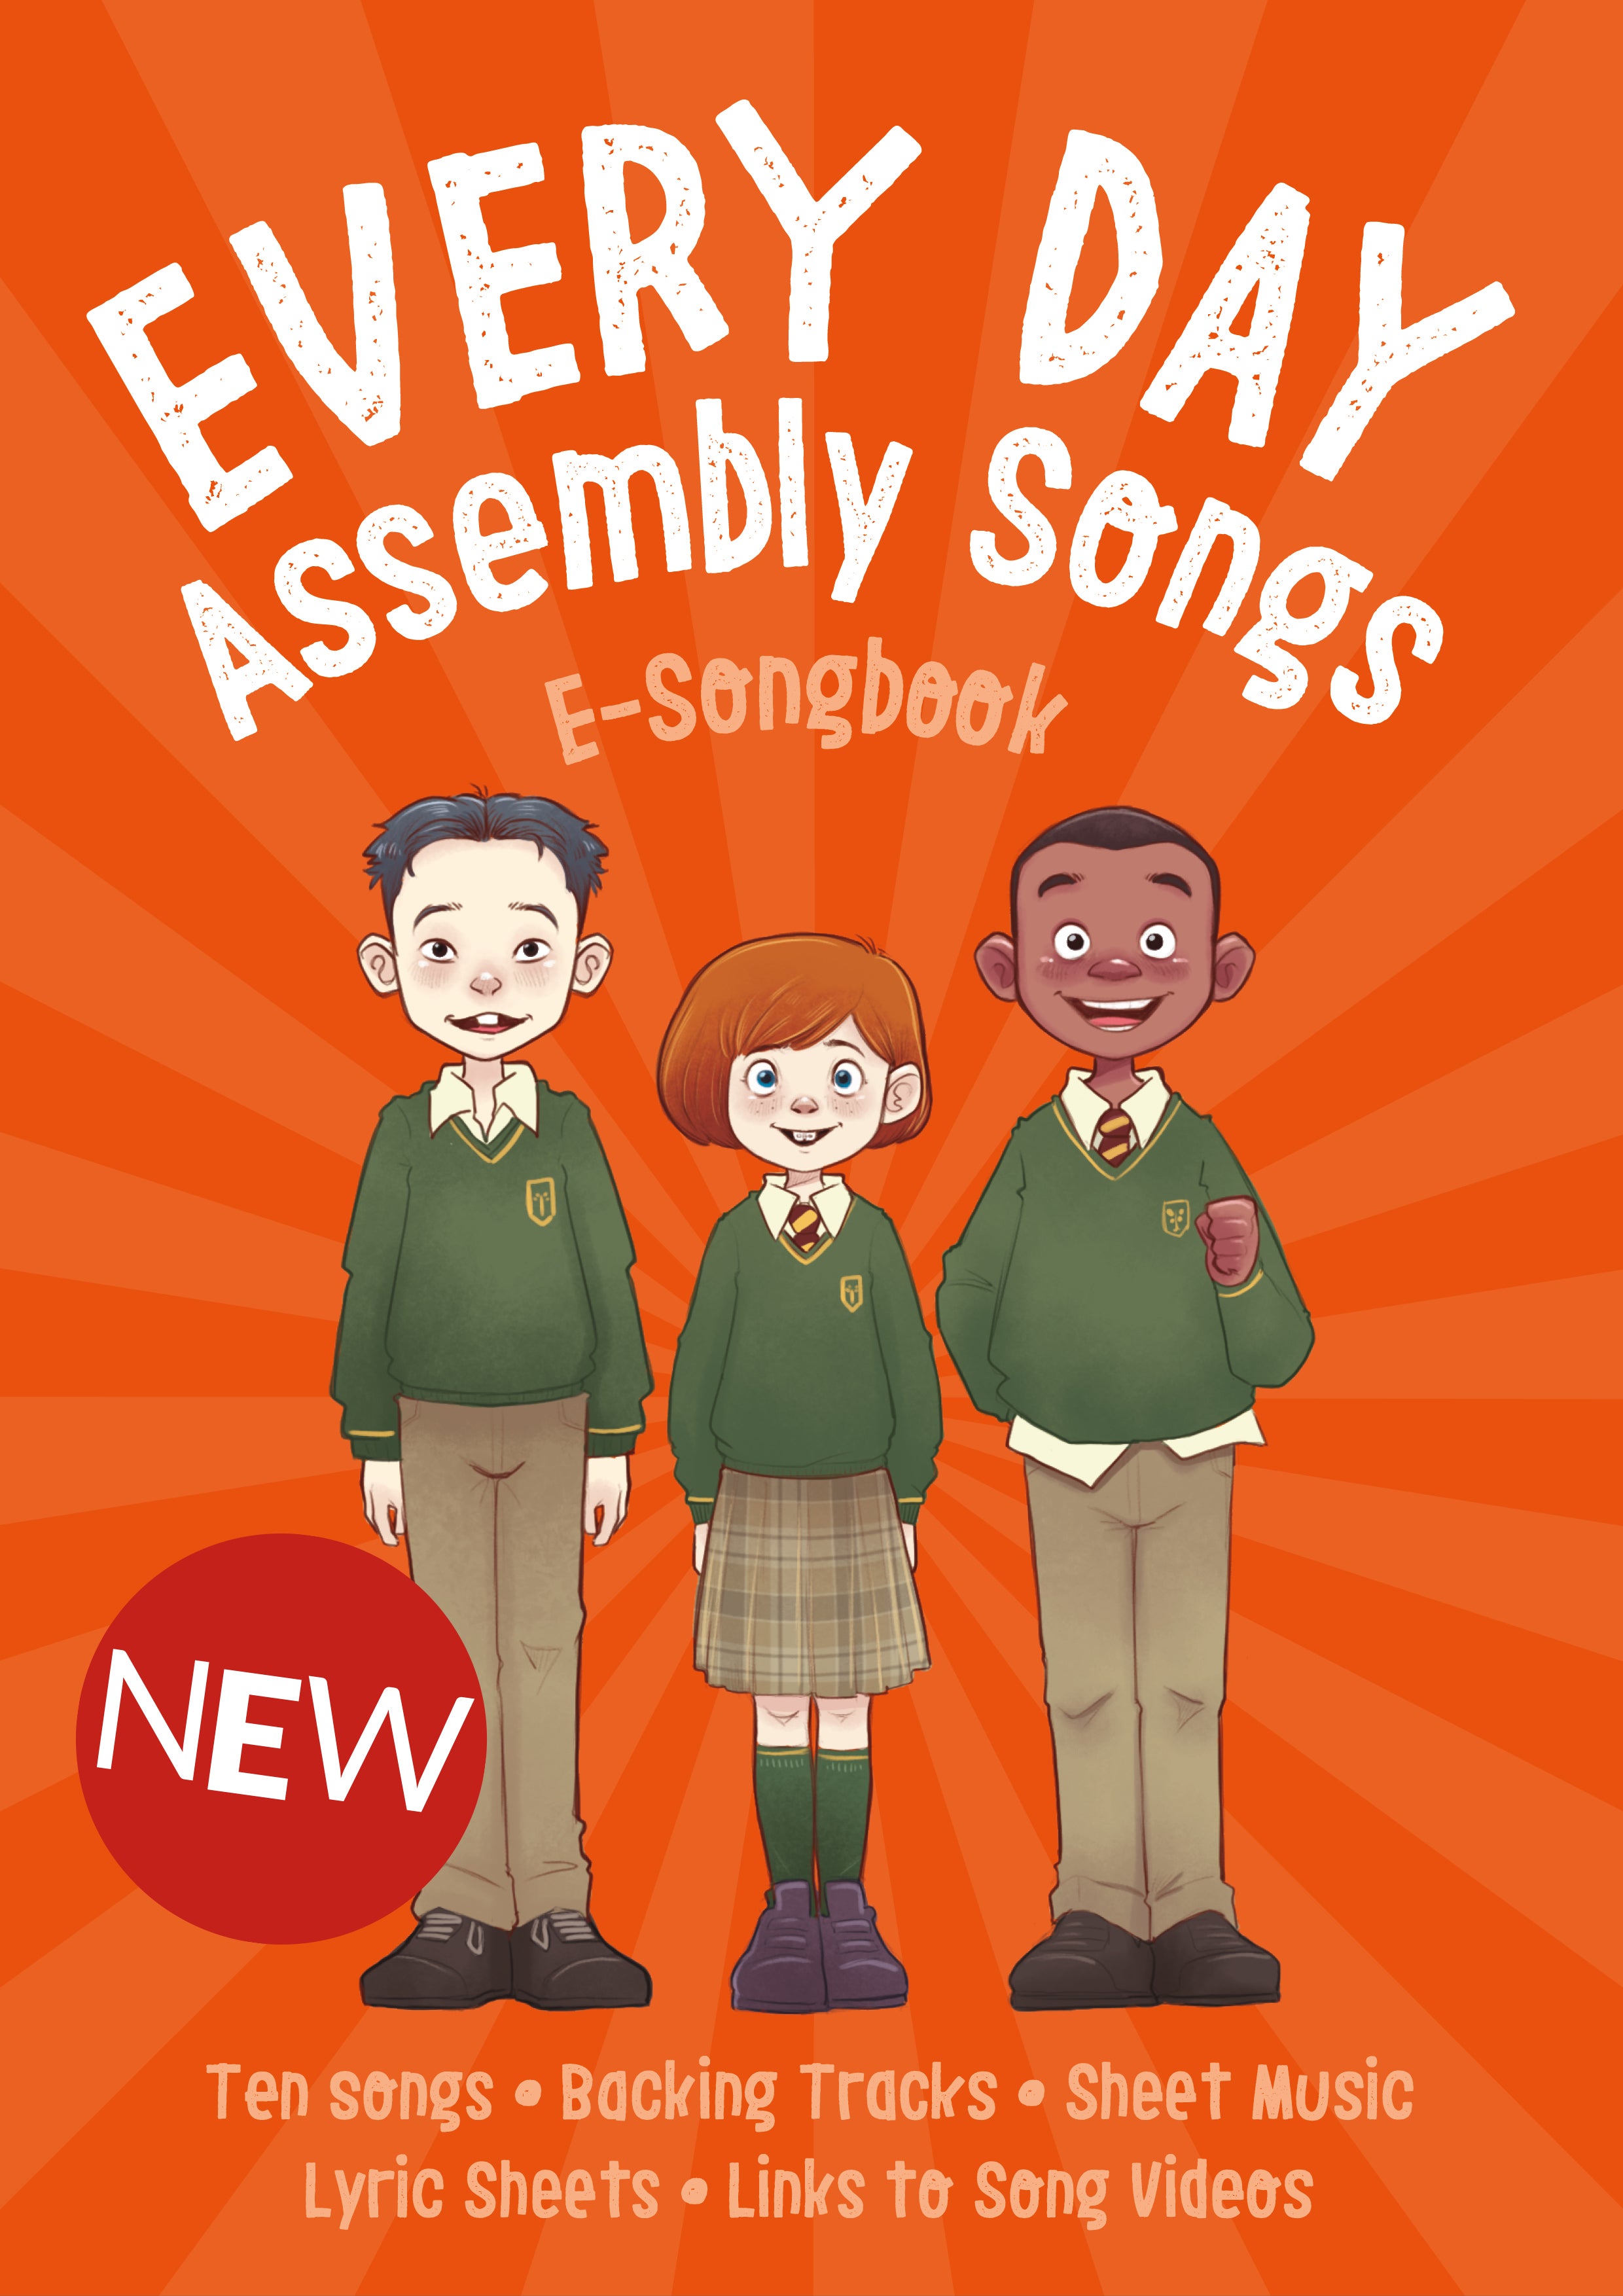 Every Day Assembly Songs - E-Songbook - FREE